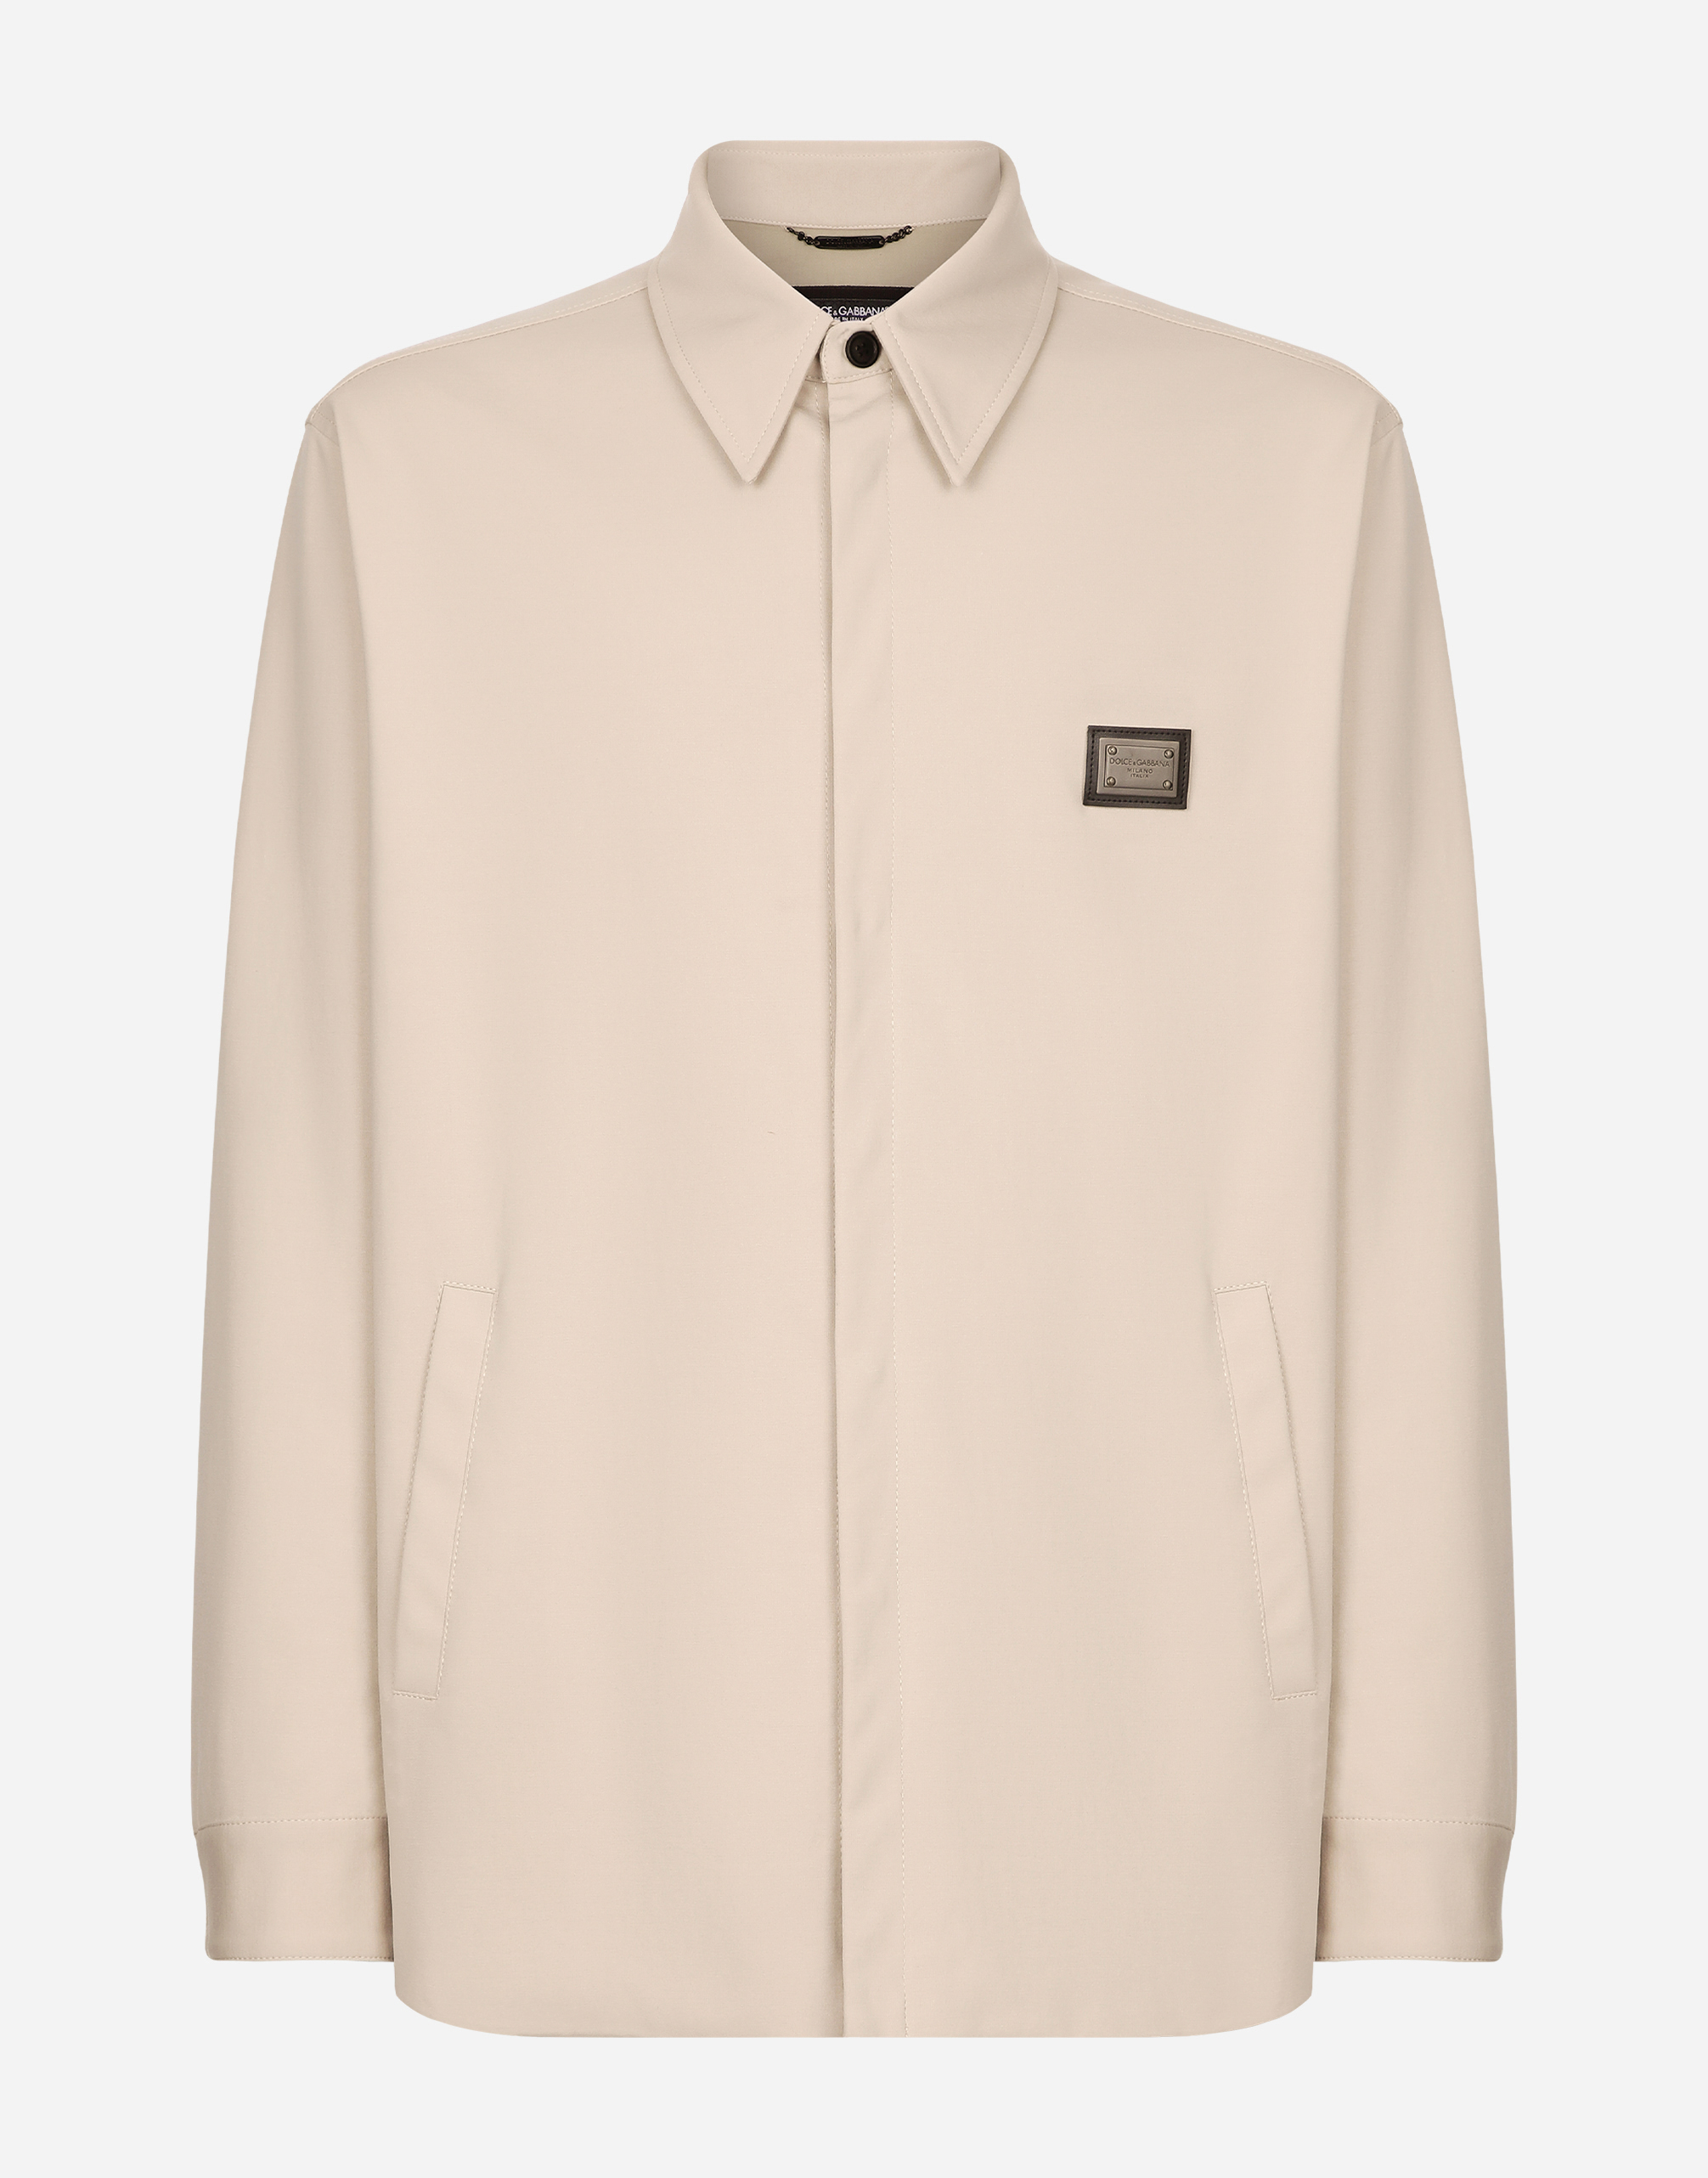 Dolce & Gabbana Technical Fabric Shirt With Tag In Beige